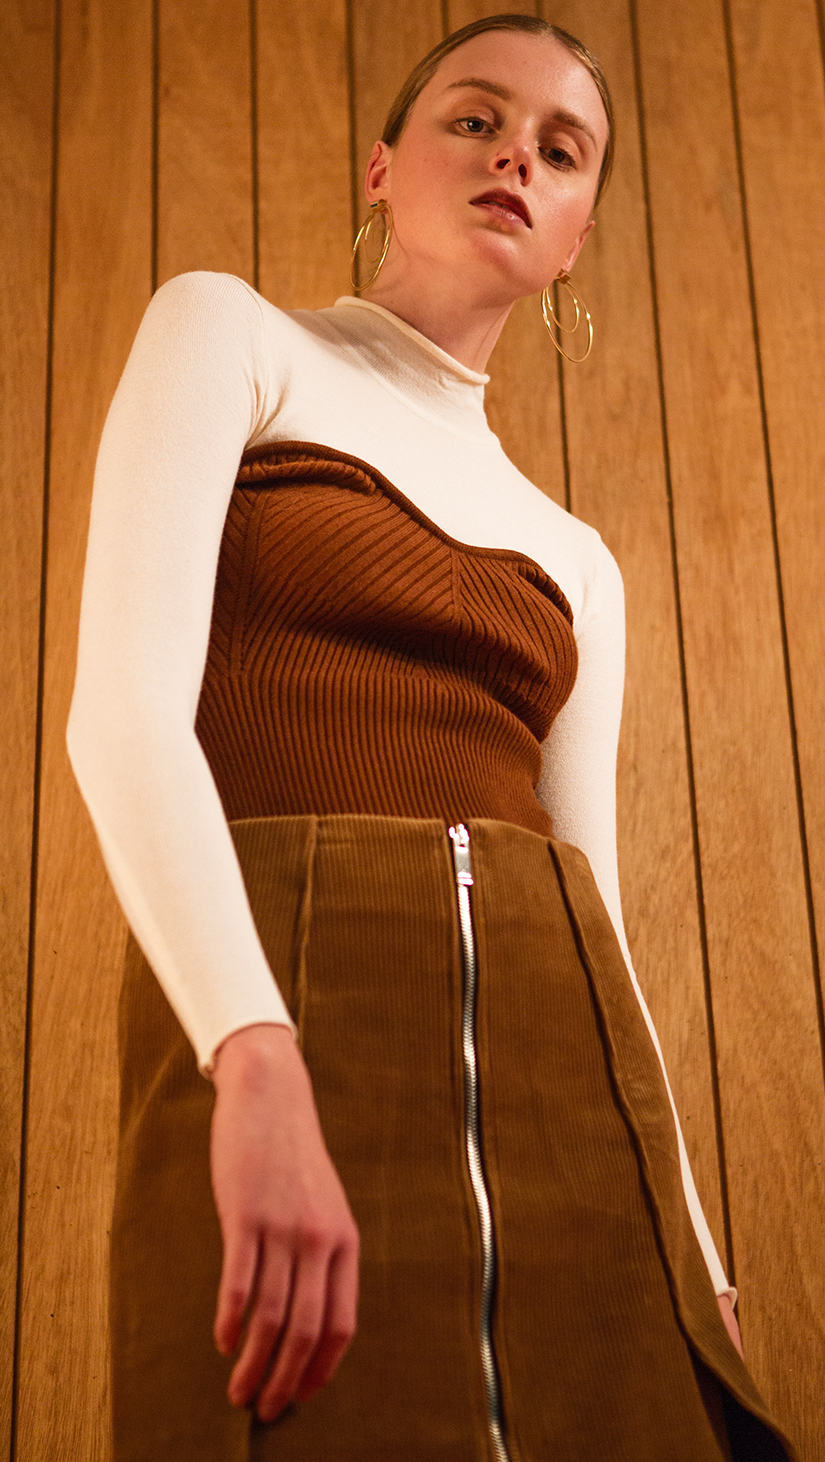 The Kaare Top in Brown/Ivory. With a seamless mock neckline, heart shape bustier layered in lightweight knit top. Designed to be slim fitting. Pulls on.